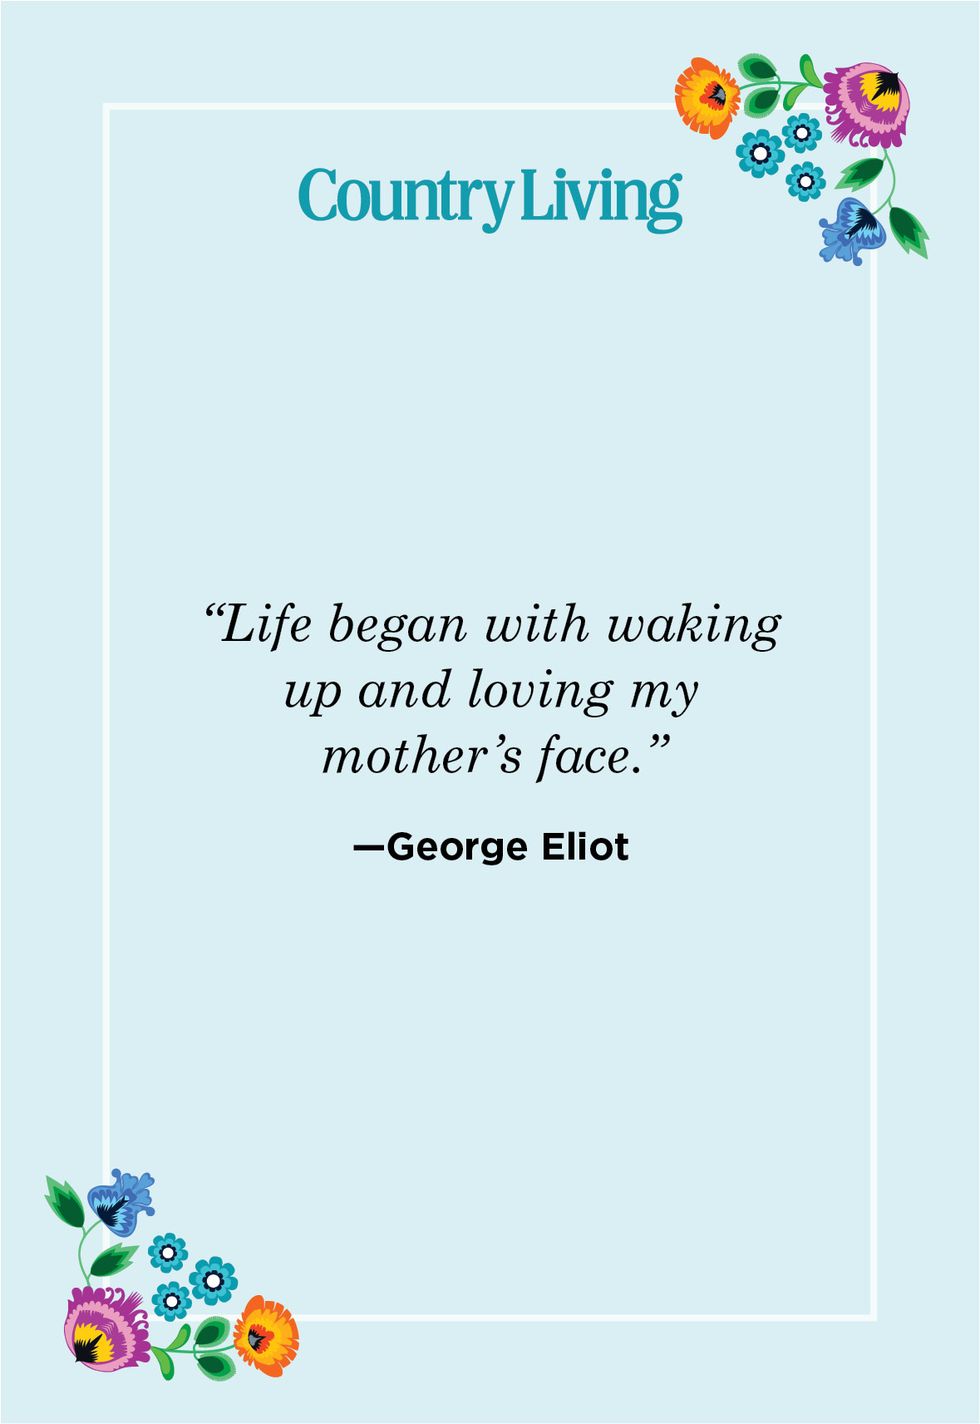 mother daughter quote about unconditional love by author george eliot, aka mary ann evans